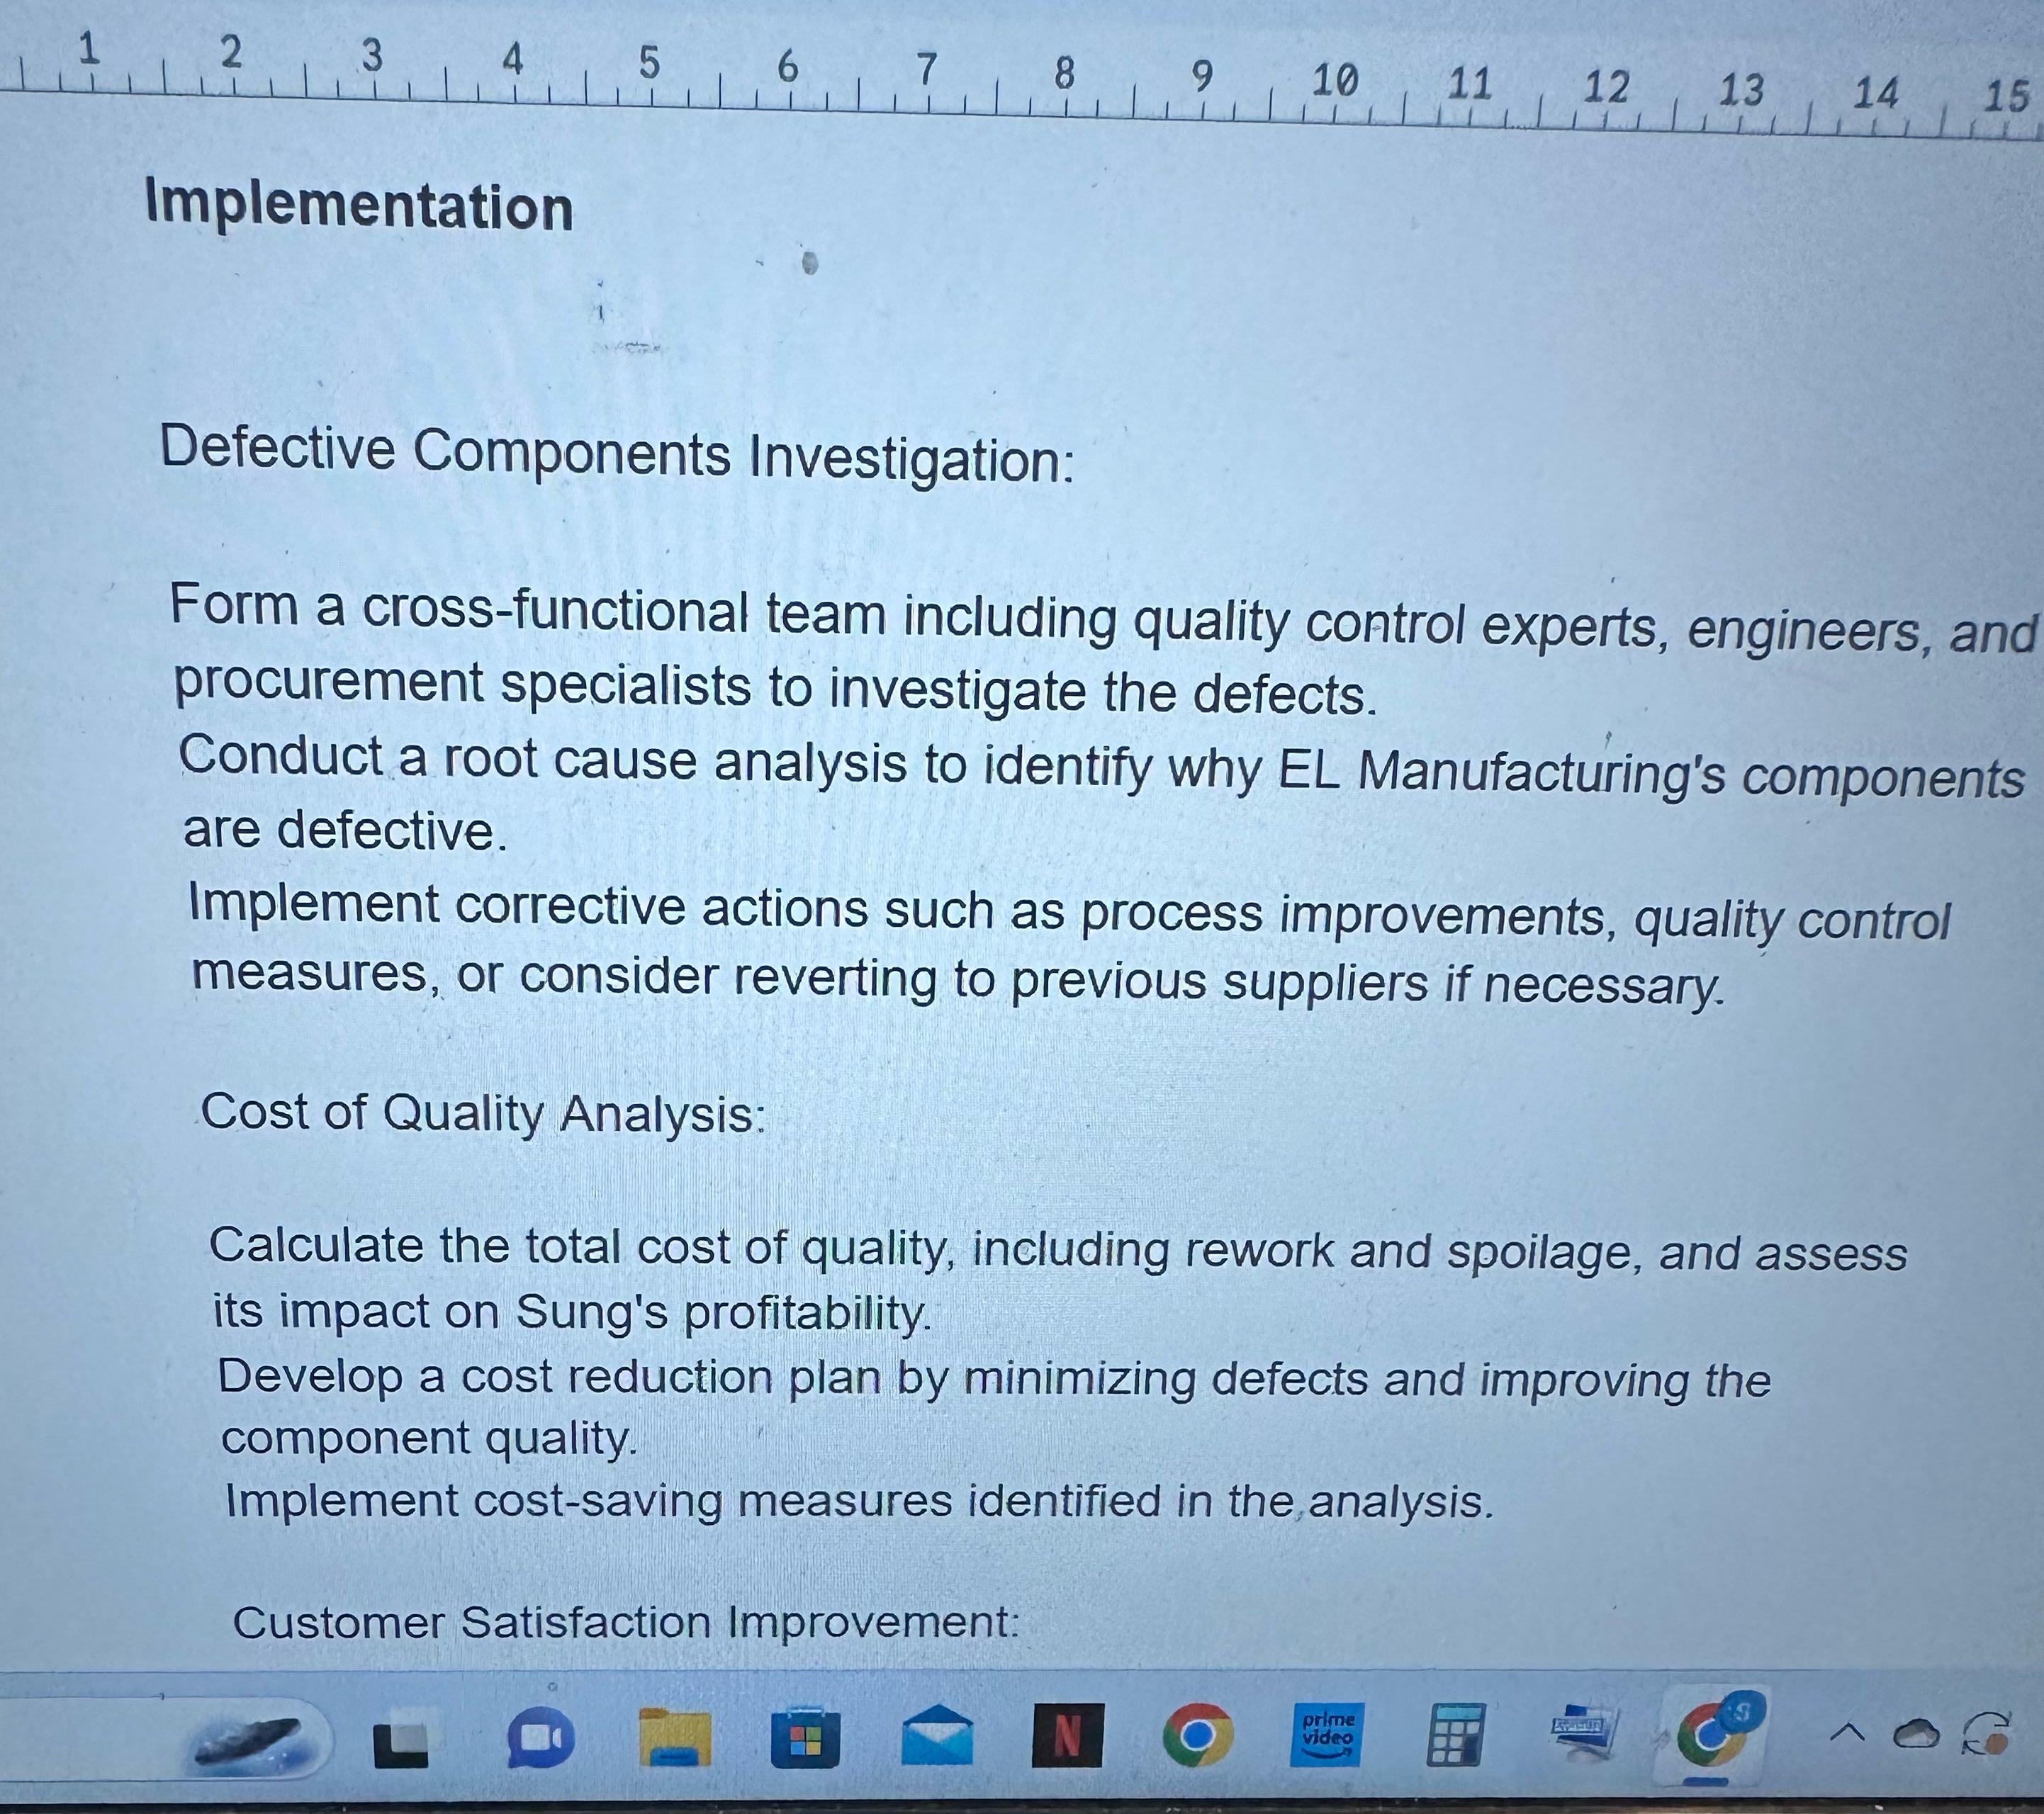 1 2 3 4 Implementation 5 6 7 8 9 10 11 12 13 Defective Components Investigation: Form a cross-functional team